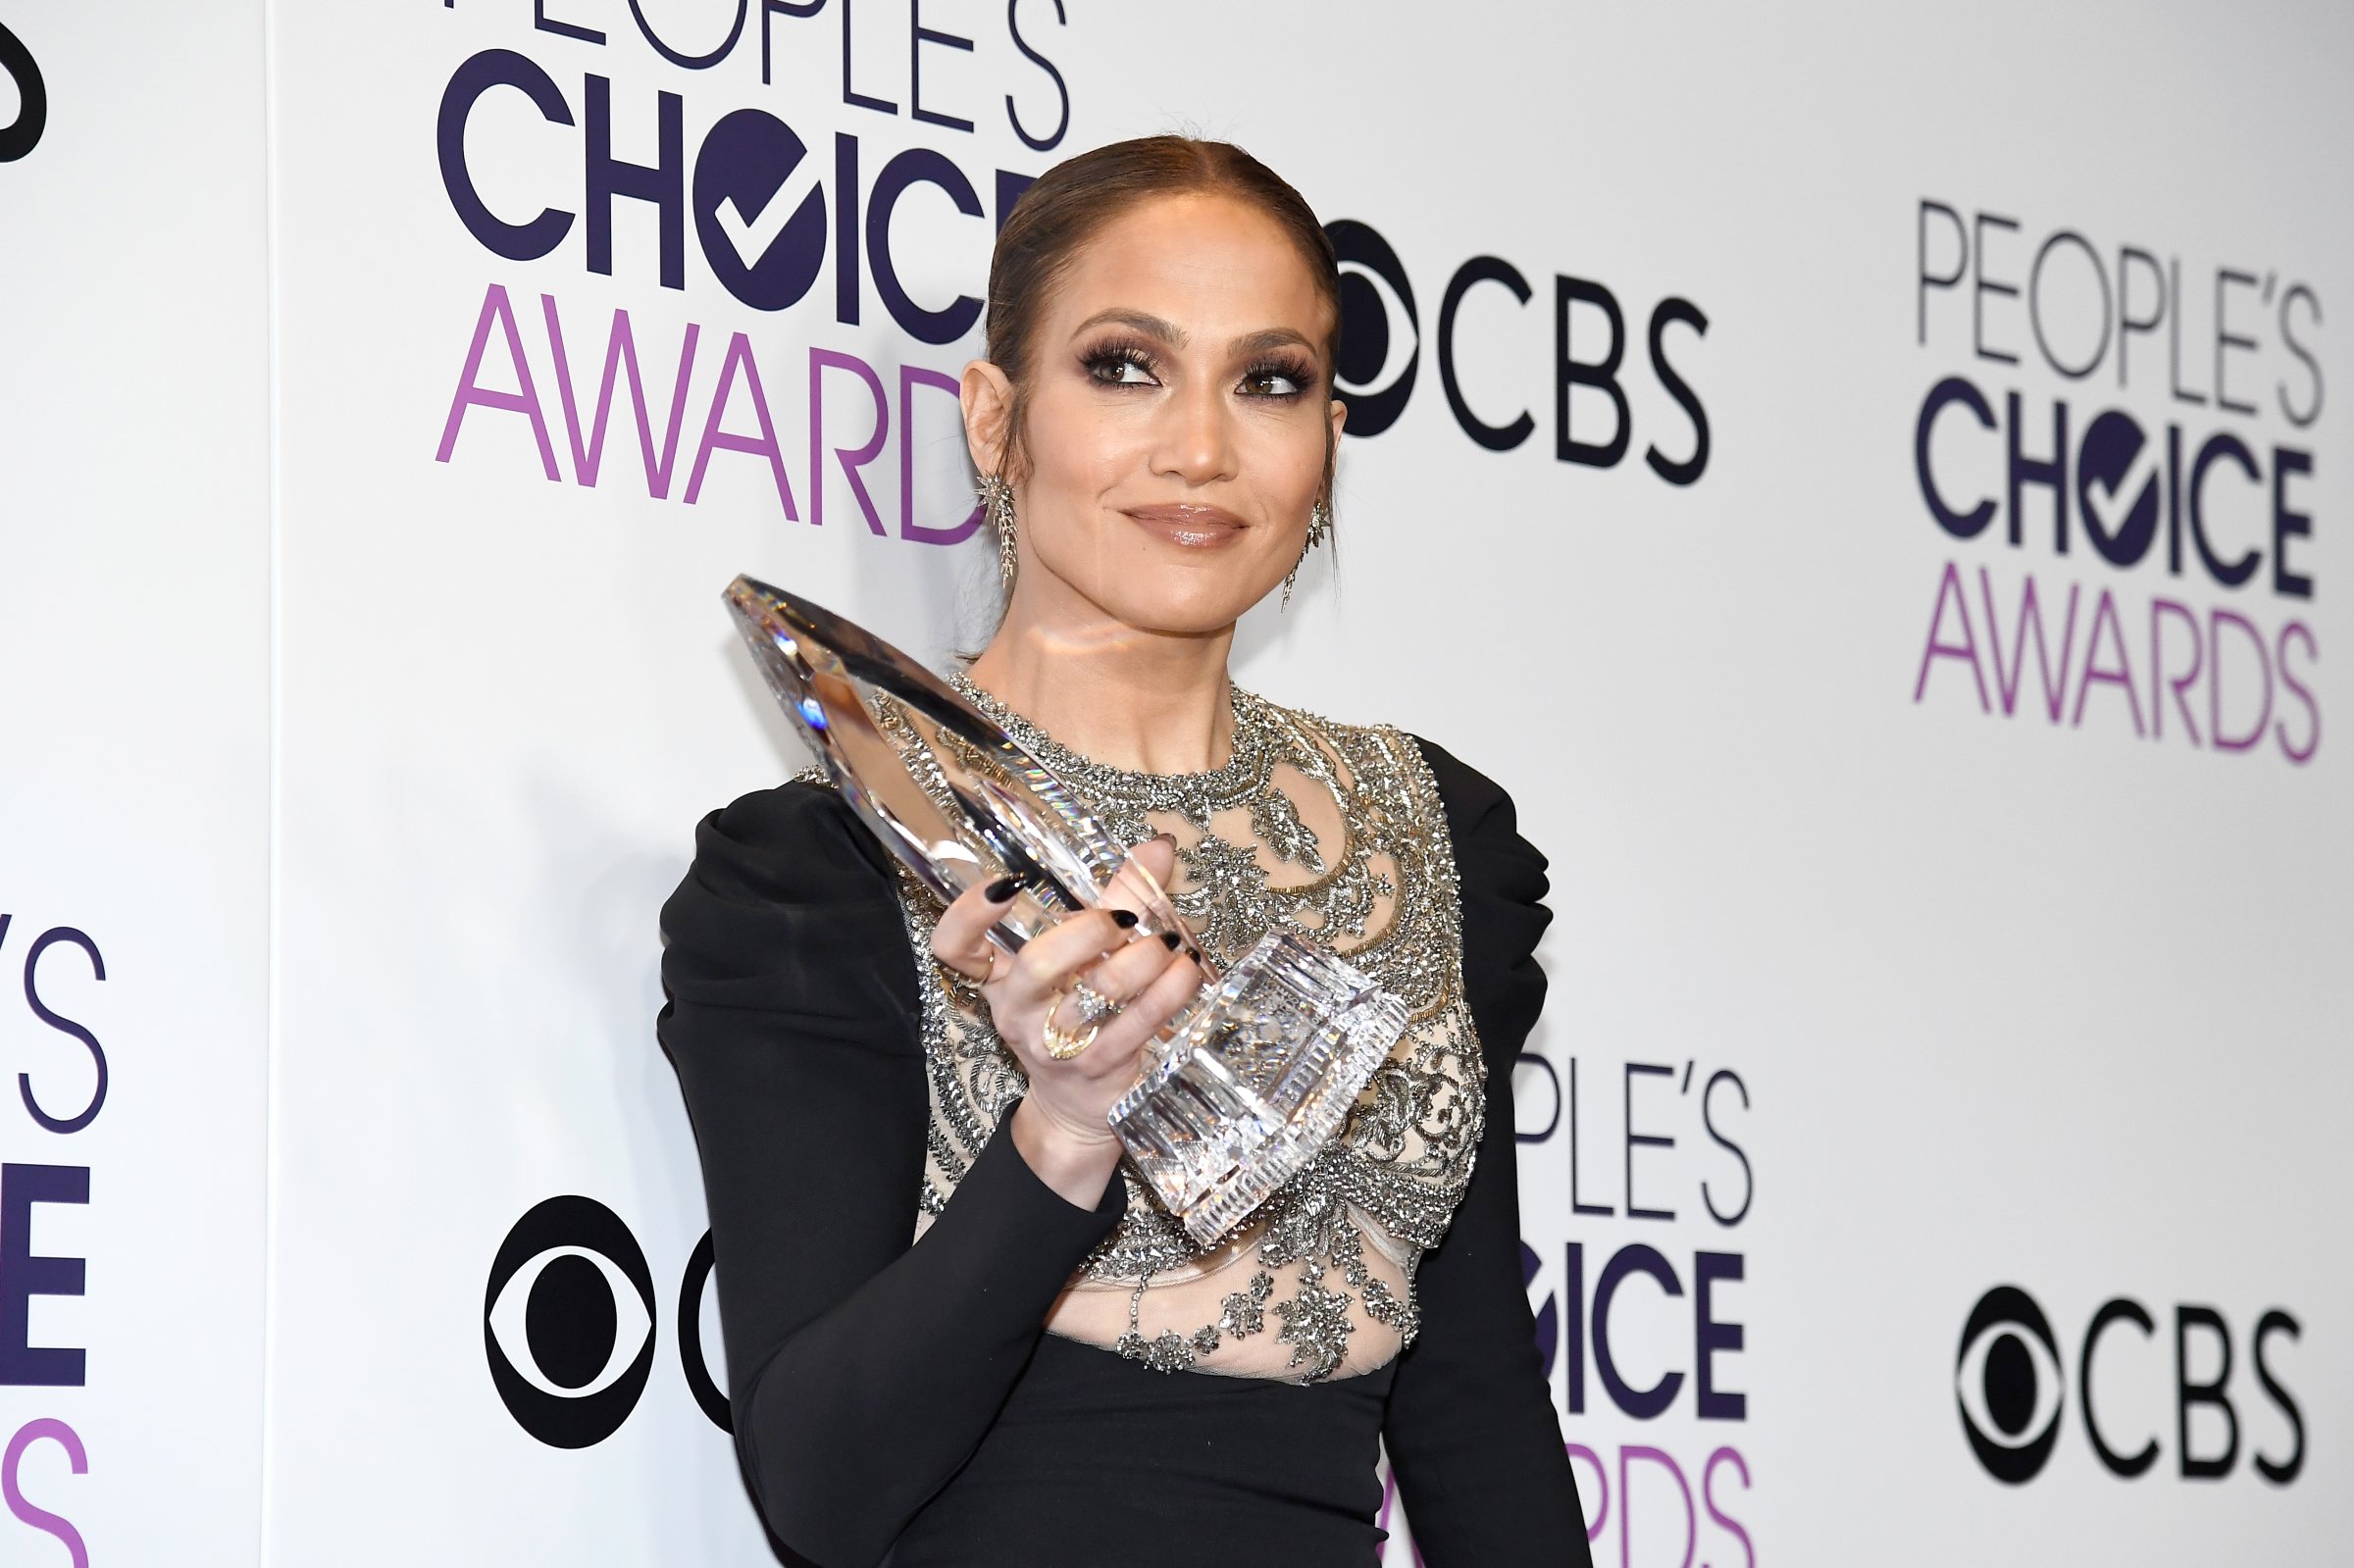 Actress/recording artist Jennifer Lopez, winner of Favorite TV Crime Drama Actress award for "Shades of Blue" poses in the press room at the People's Choice Awards 2017 at Microsoft Theater on January 18, 2017 in Los Angeles, California.